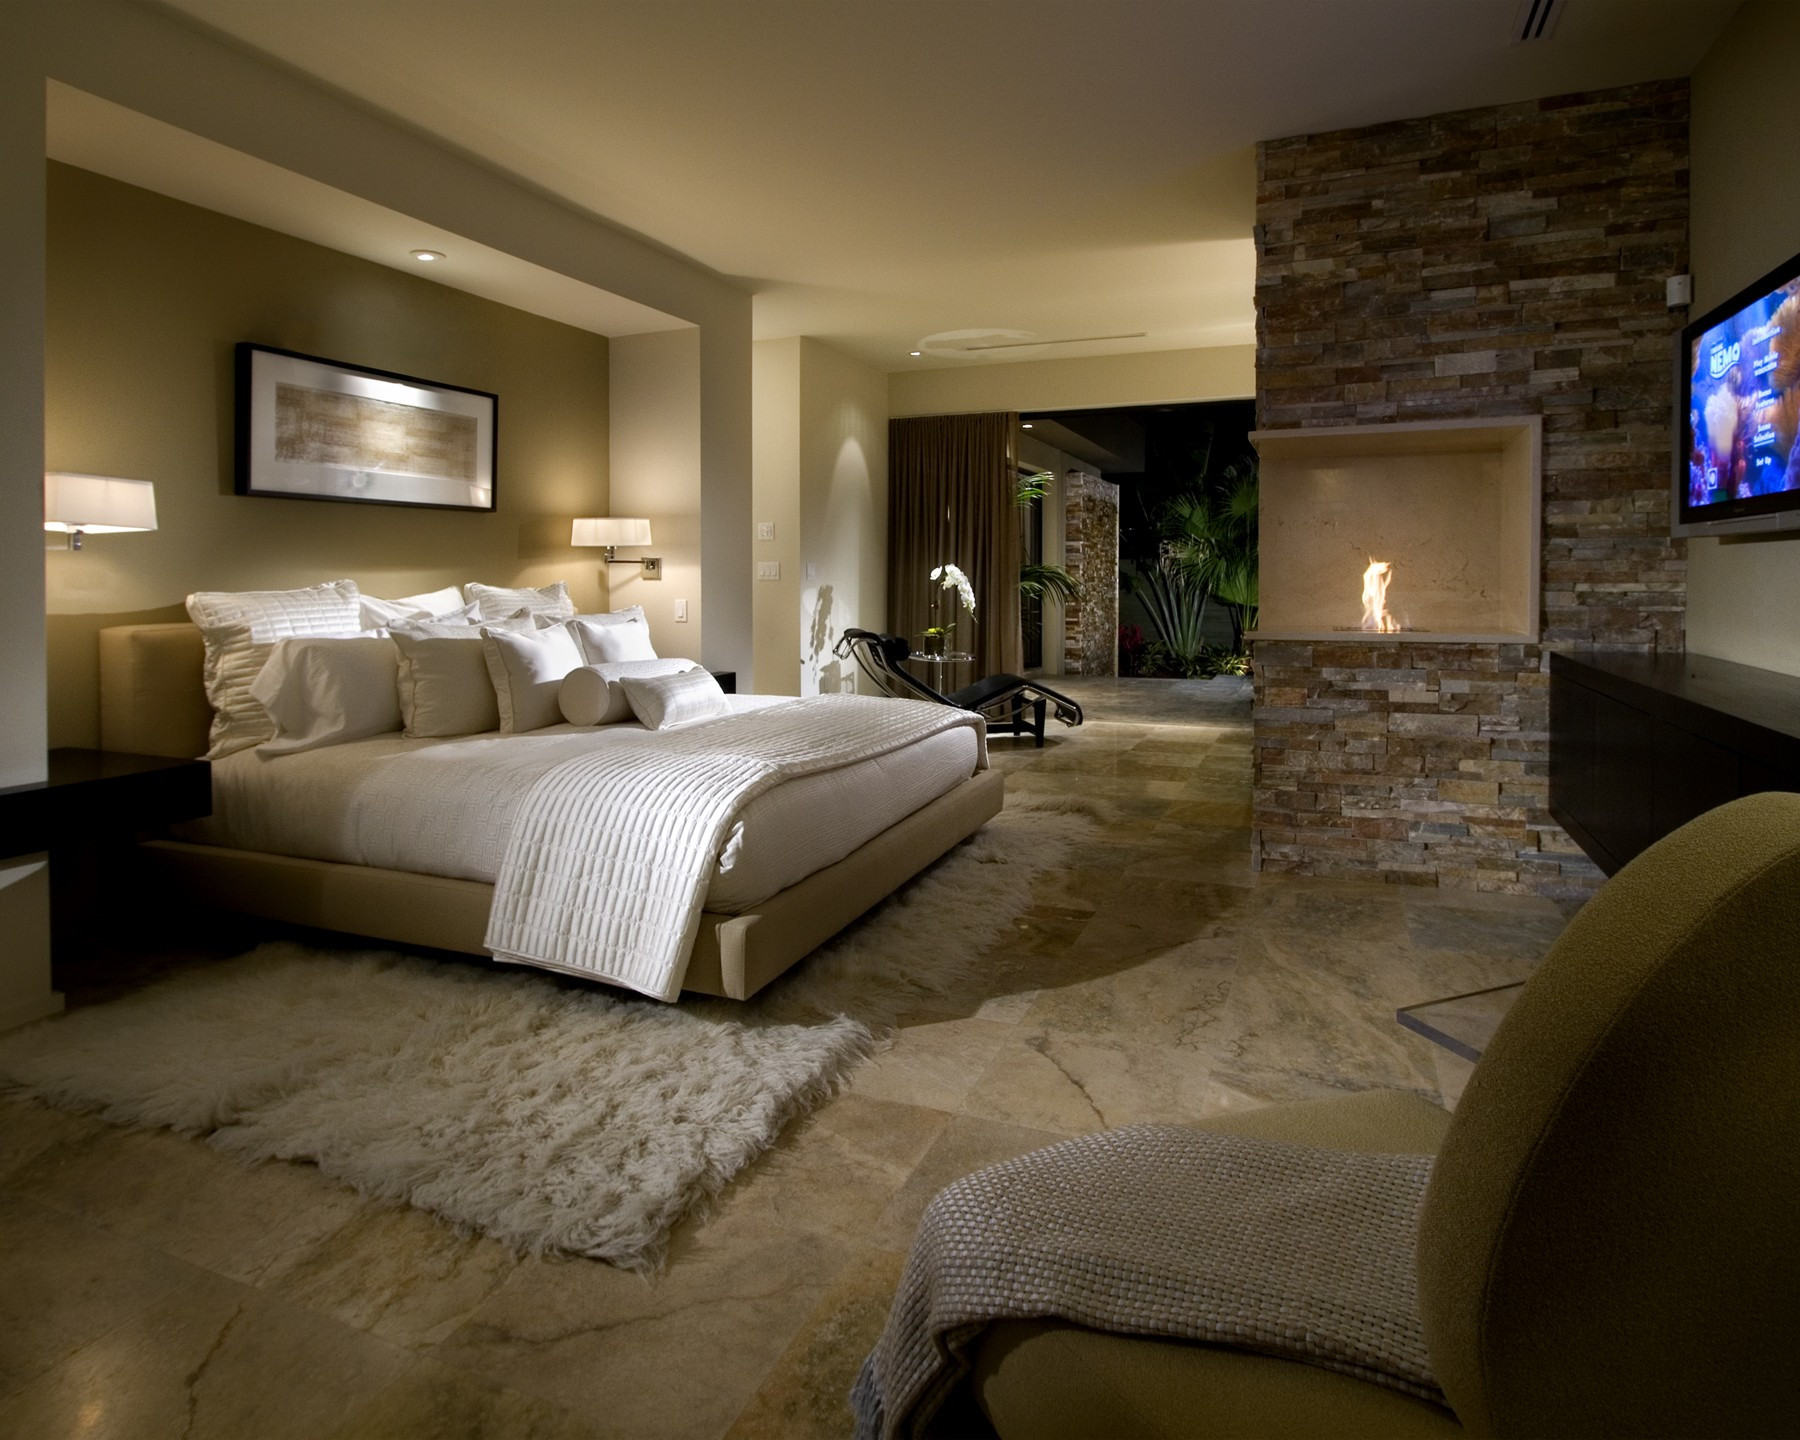 Master Bedroom Ideas
 6 Bedrooms With Fireplaces We Would Love to Wake Up To